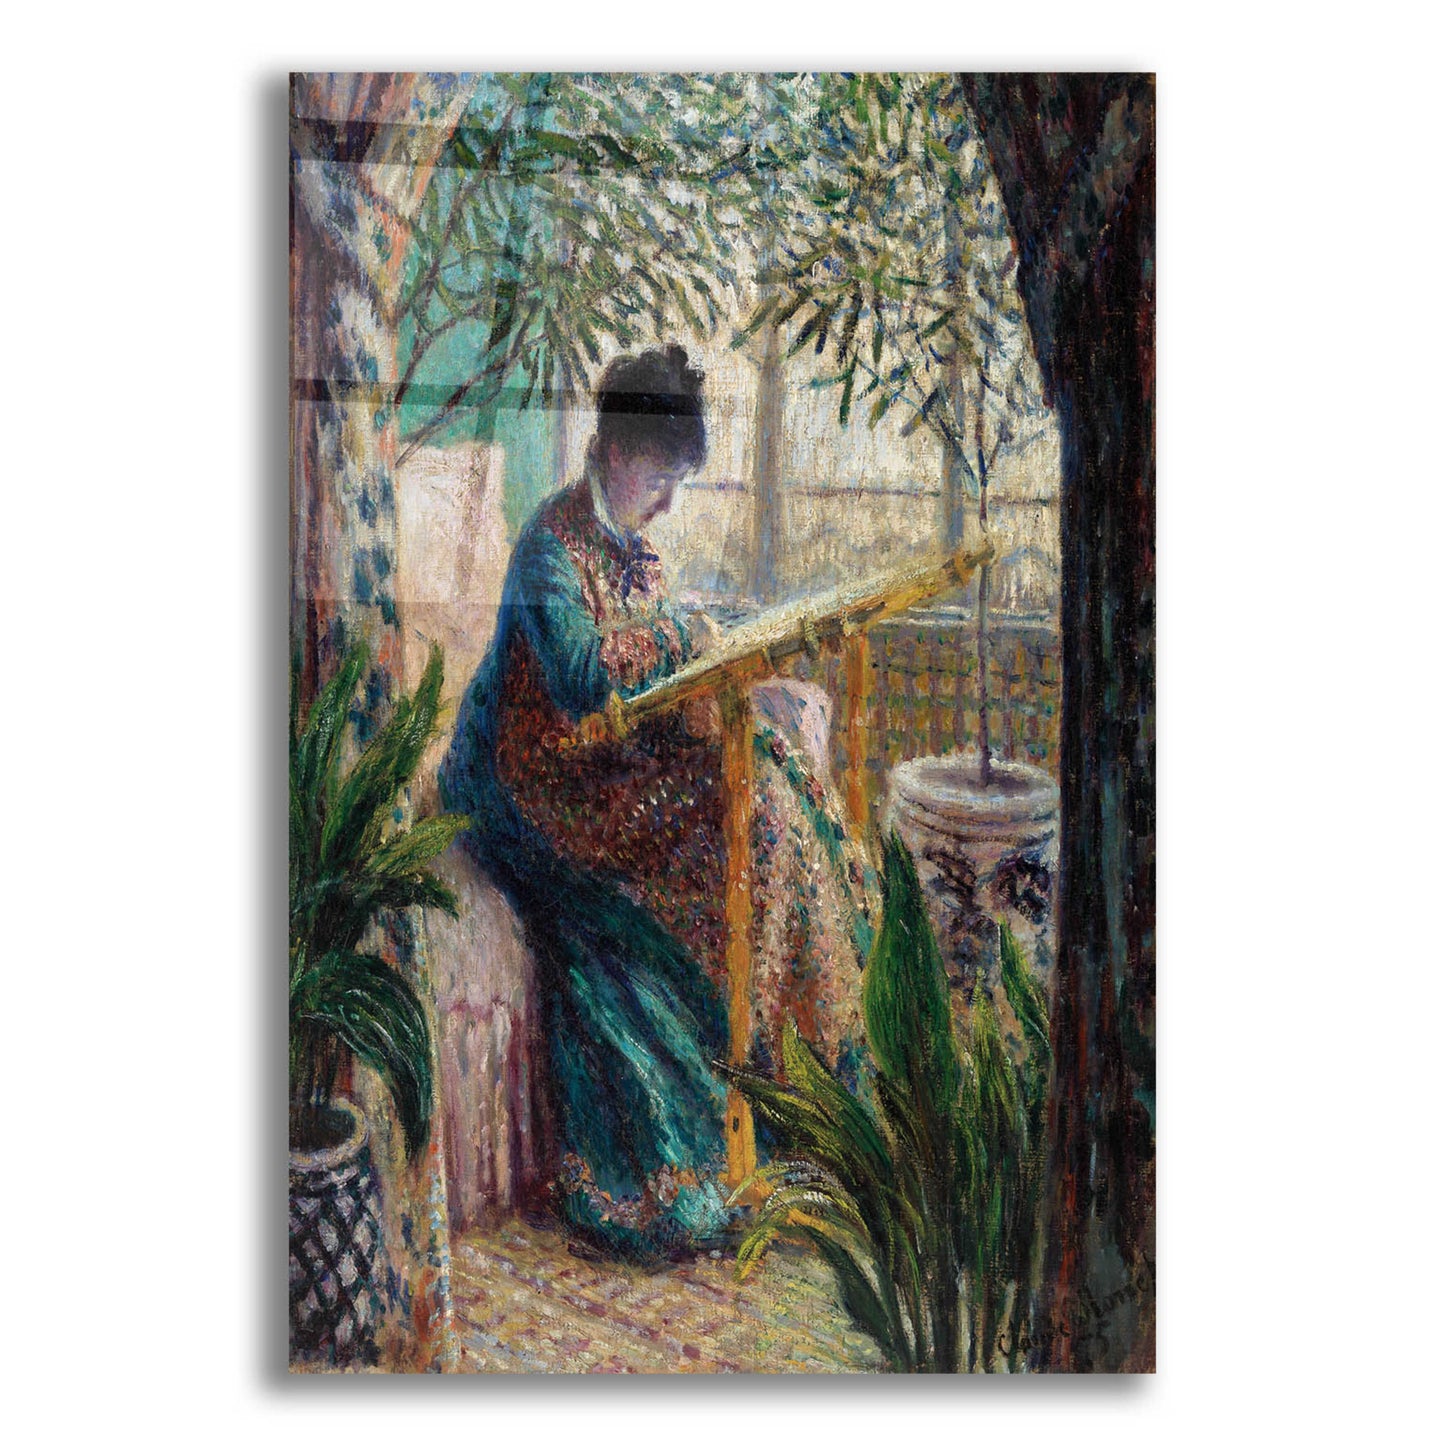 Epic Art 'Madame Monet Embroidering' by Claude Monet, Acrylic Glass Wall Art,12x16